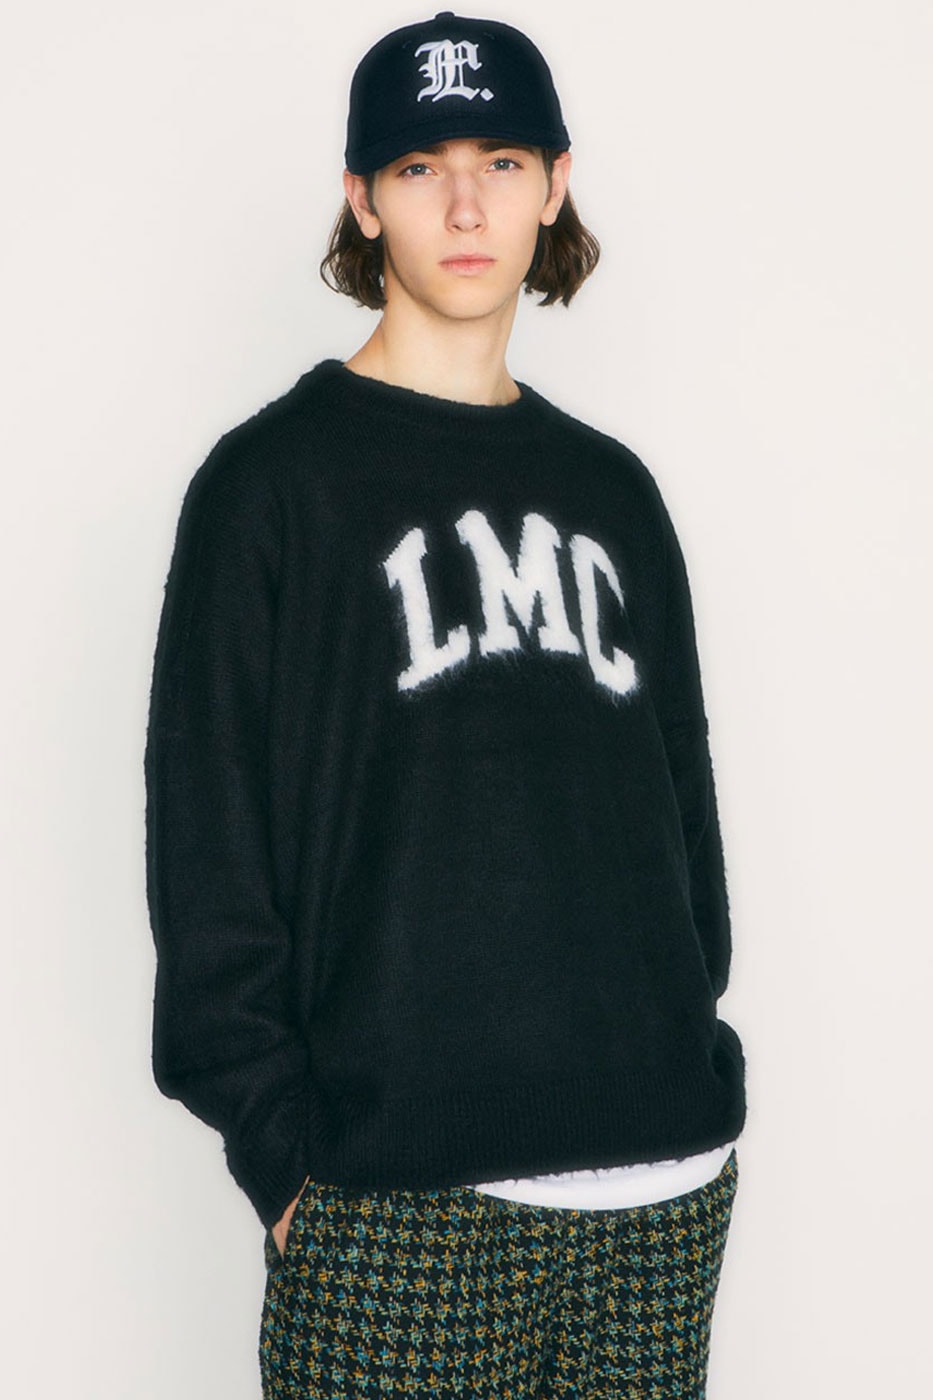 LMC Fall Winter 2022 Collection Lookbook showcase hongdae flagship store seoul release info date price